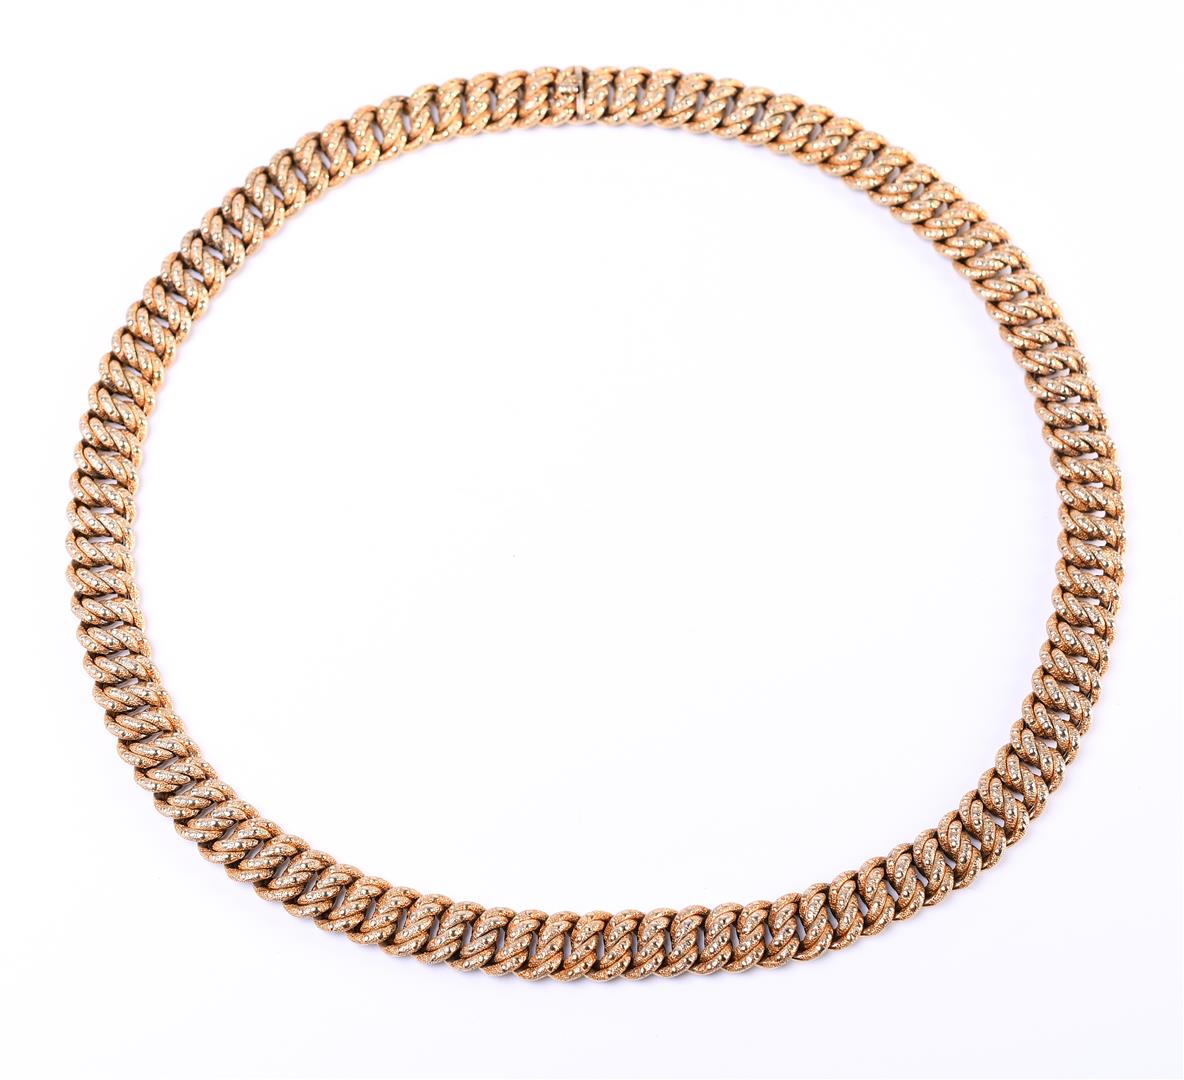 14 kt yellow gold braided gourmet necklace - Image 2 of 6